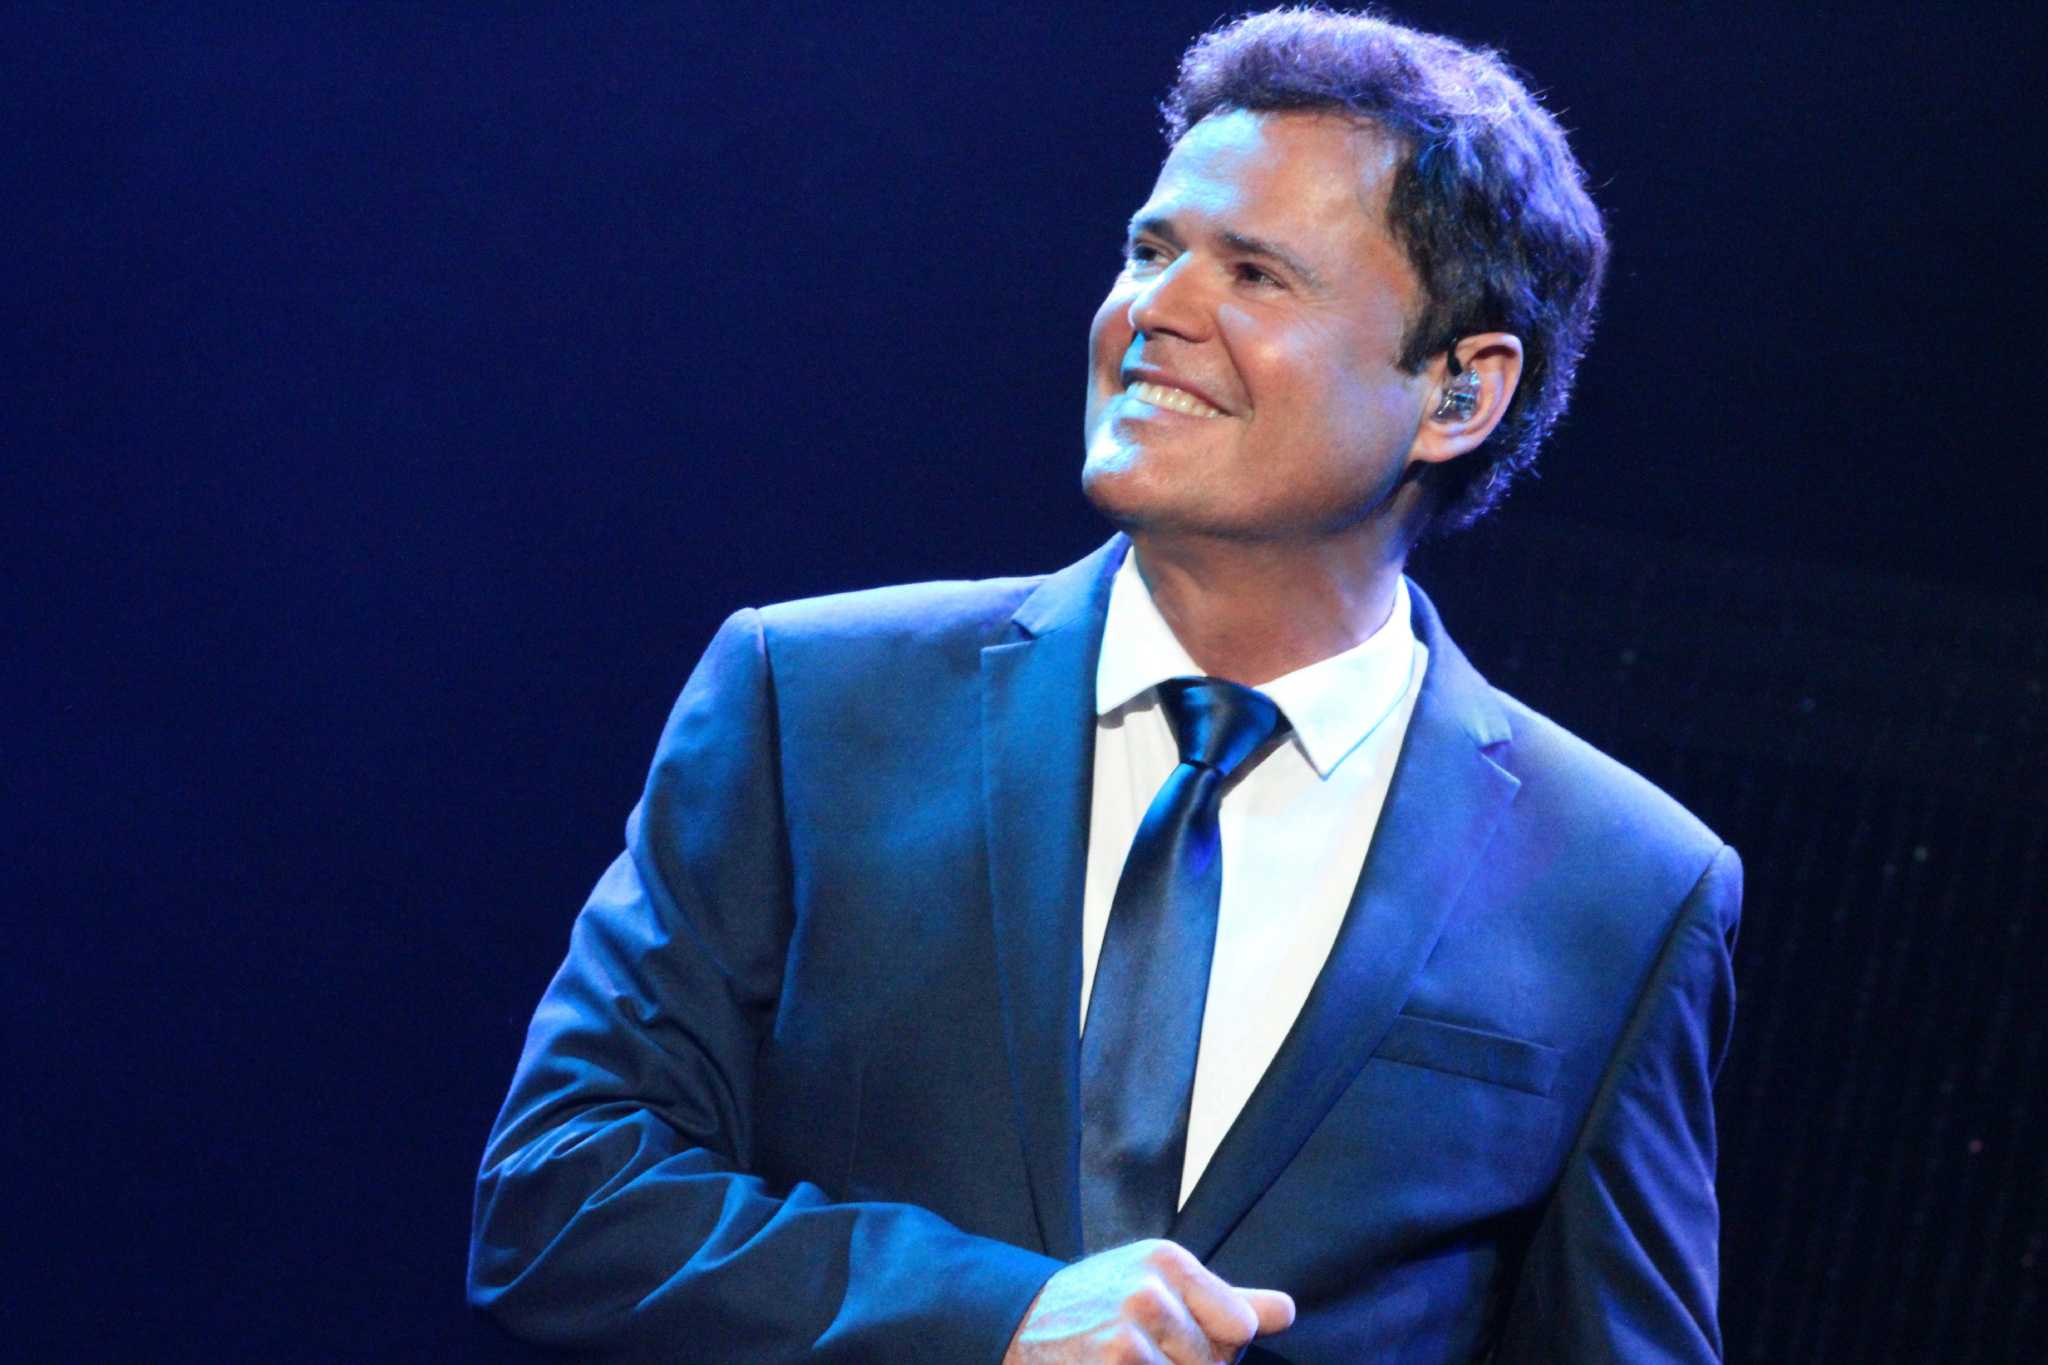 Donny Osmond’s Soundtrack of My Life Tour at Ridgefield Playhouse.